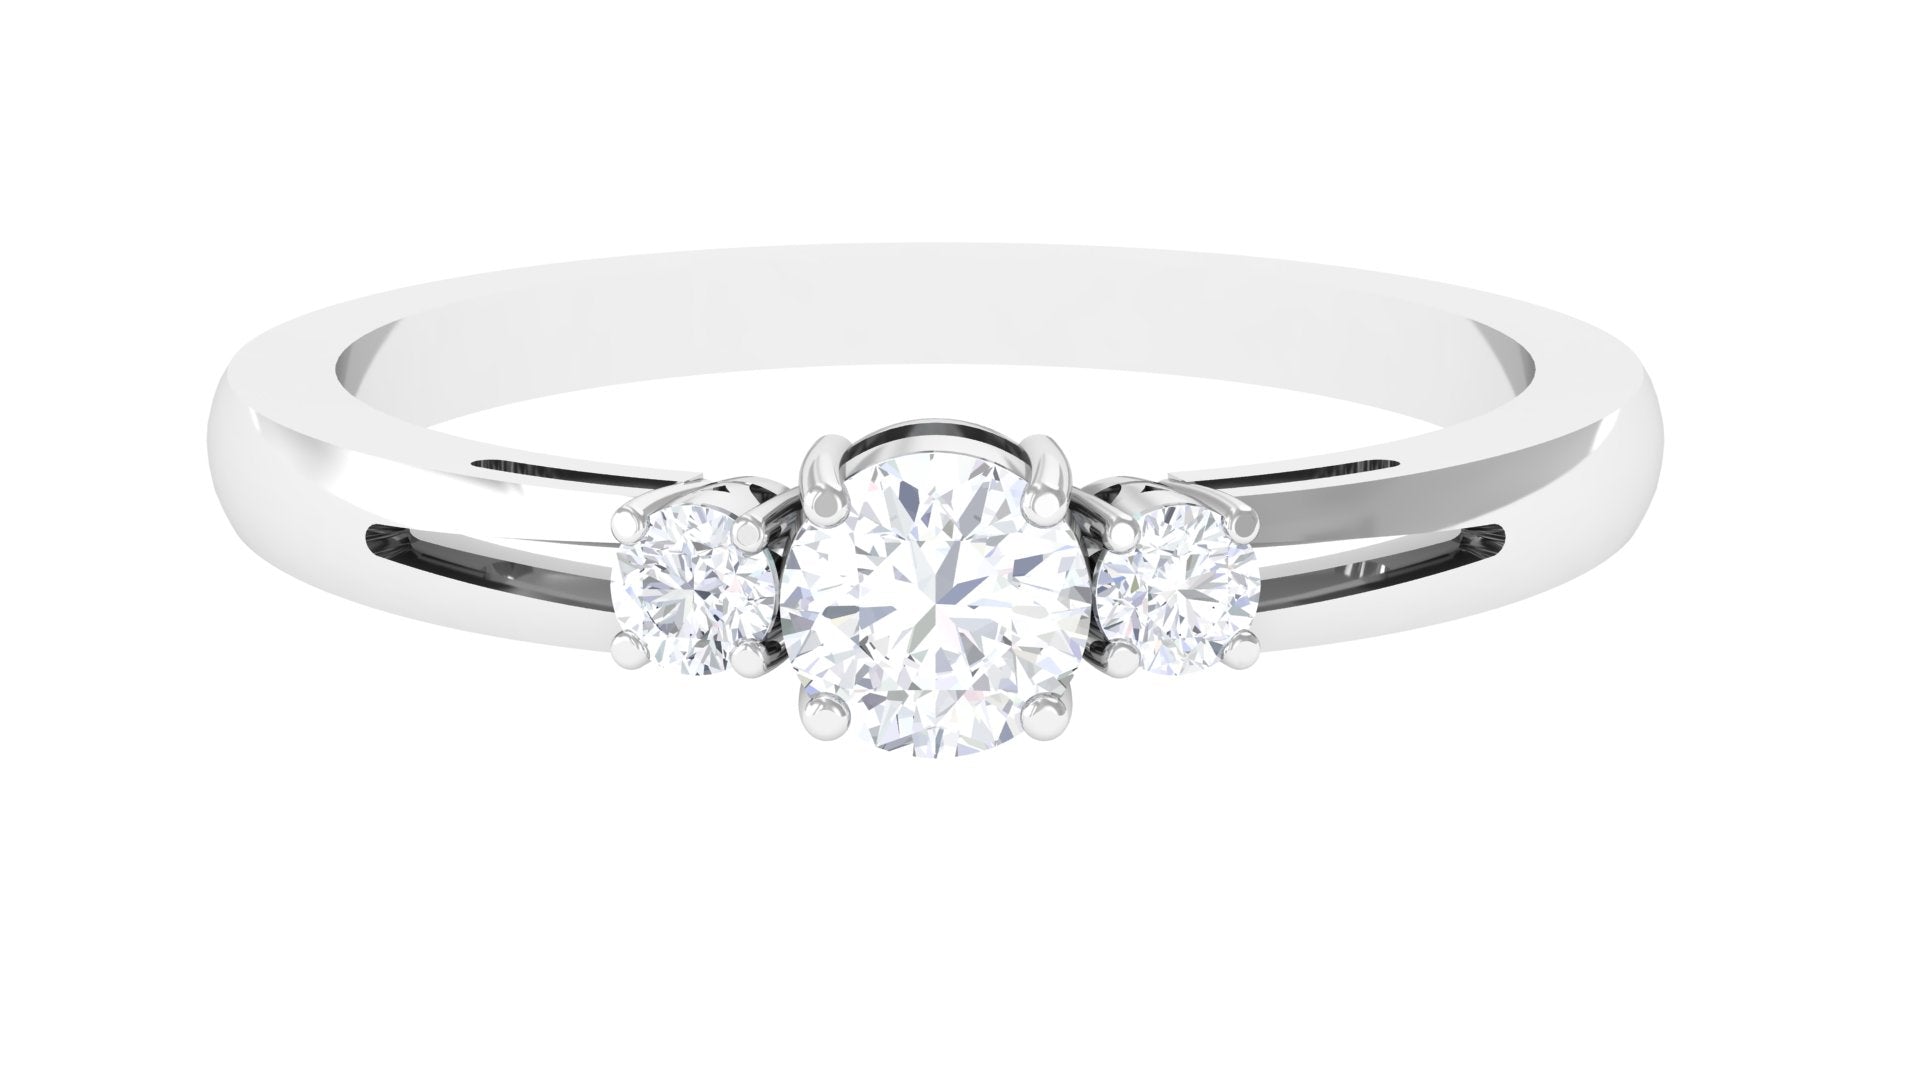 Lovely 3 Stone Moissanite Simple Ring Moissanite - ( D-VS1 ) - Color and Clarity - Rosec Jewels